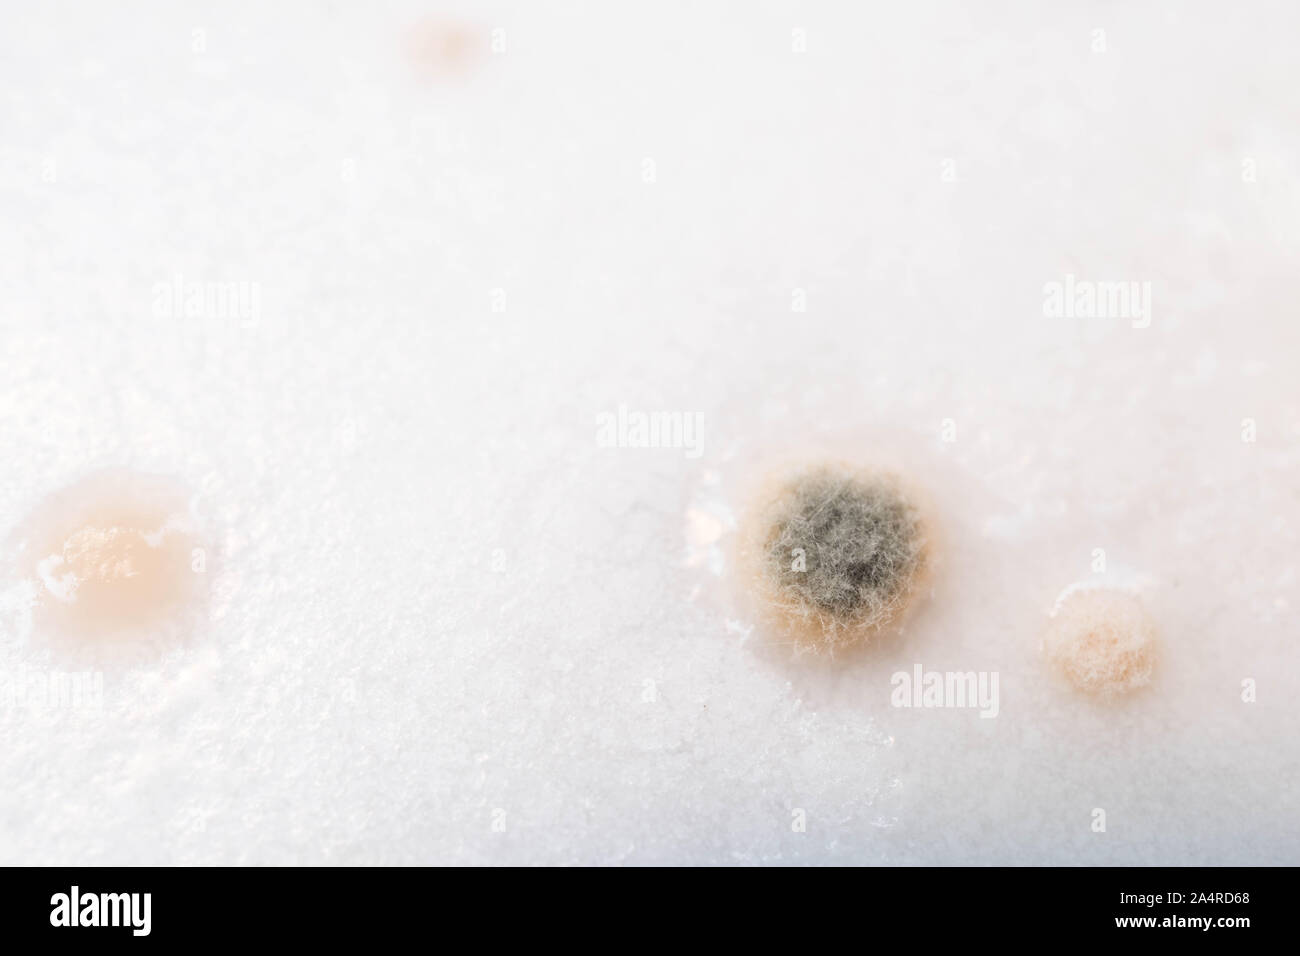 Fungus mold growing on coconut milk surface Stock Photo